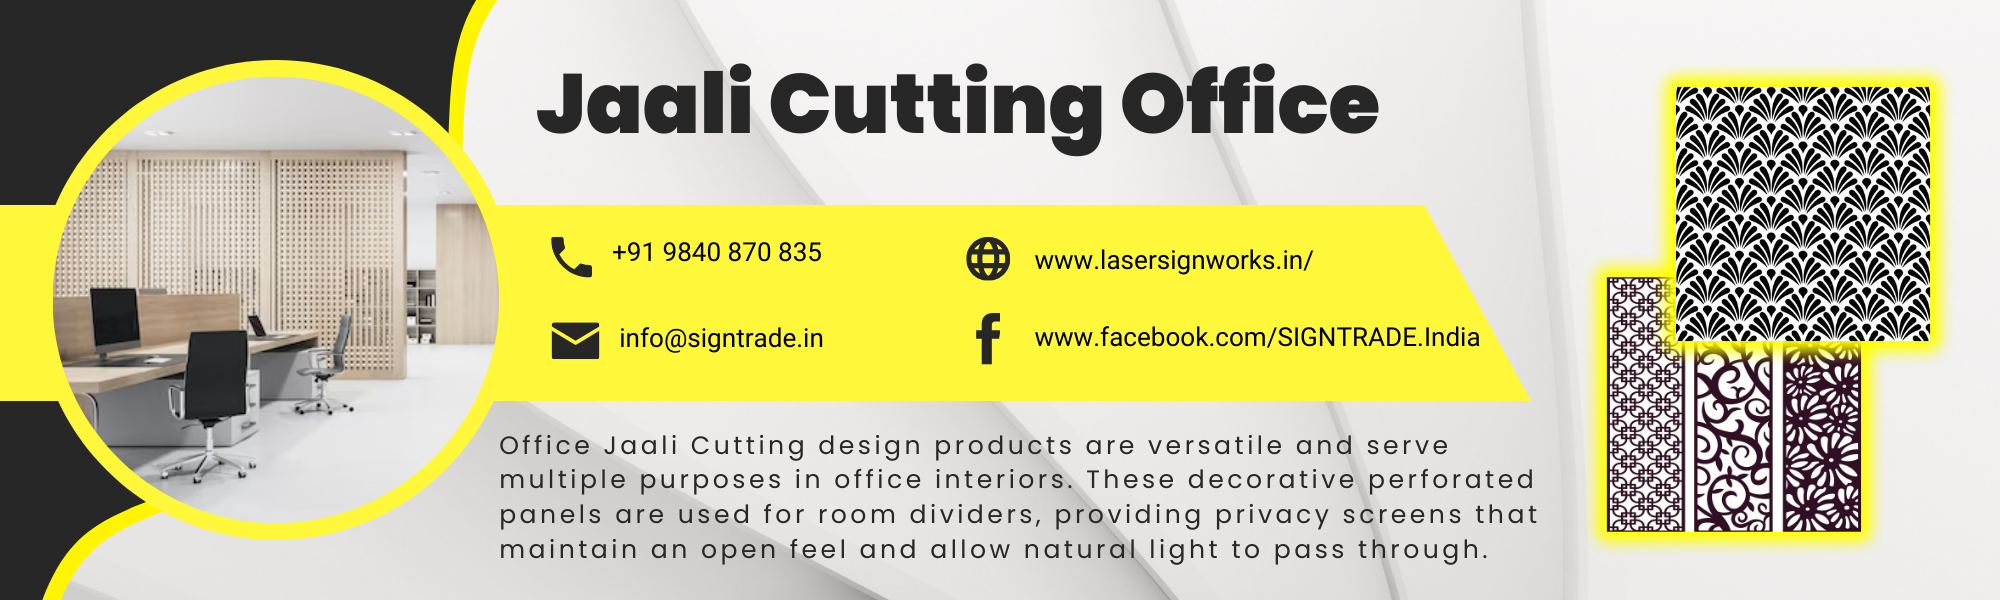 Jali Cutting Office Services